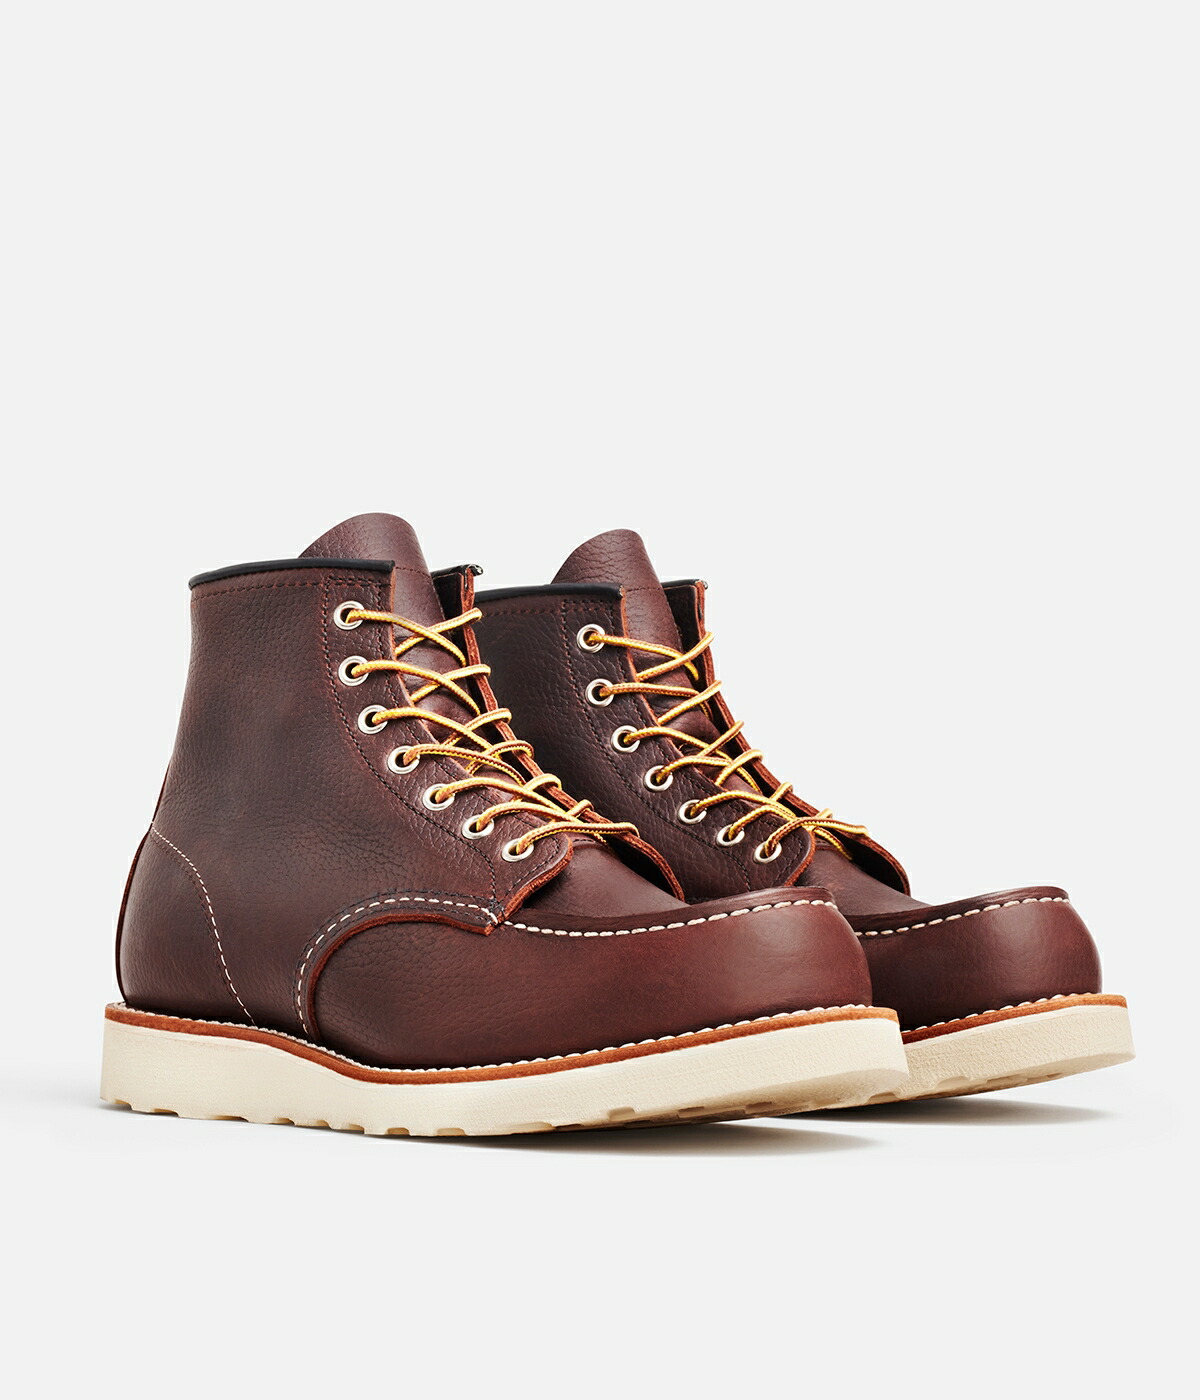 RED WING / レッドウィング ： 6INCH CLASSIC MOC ： 8138 : 8138